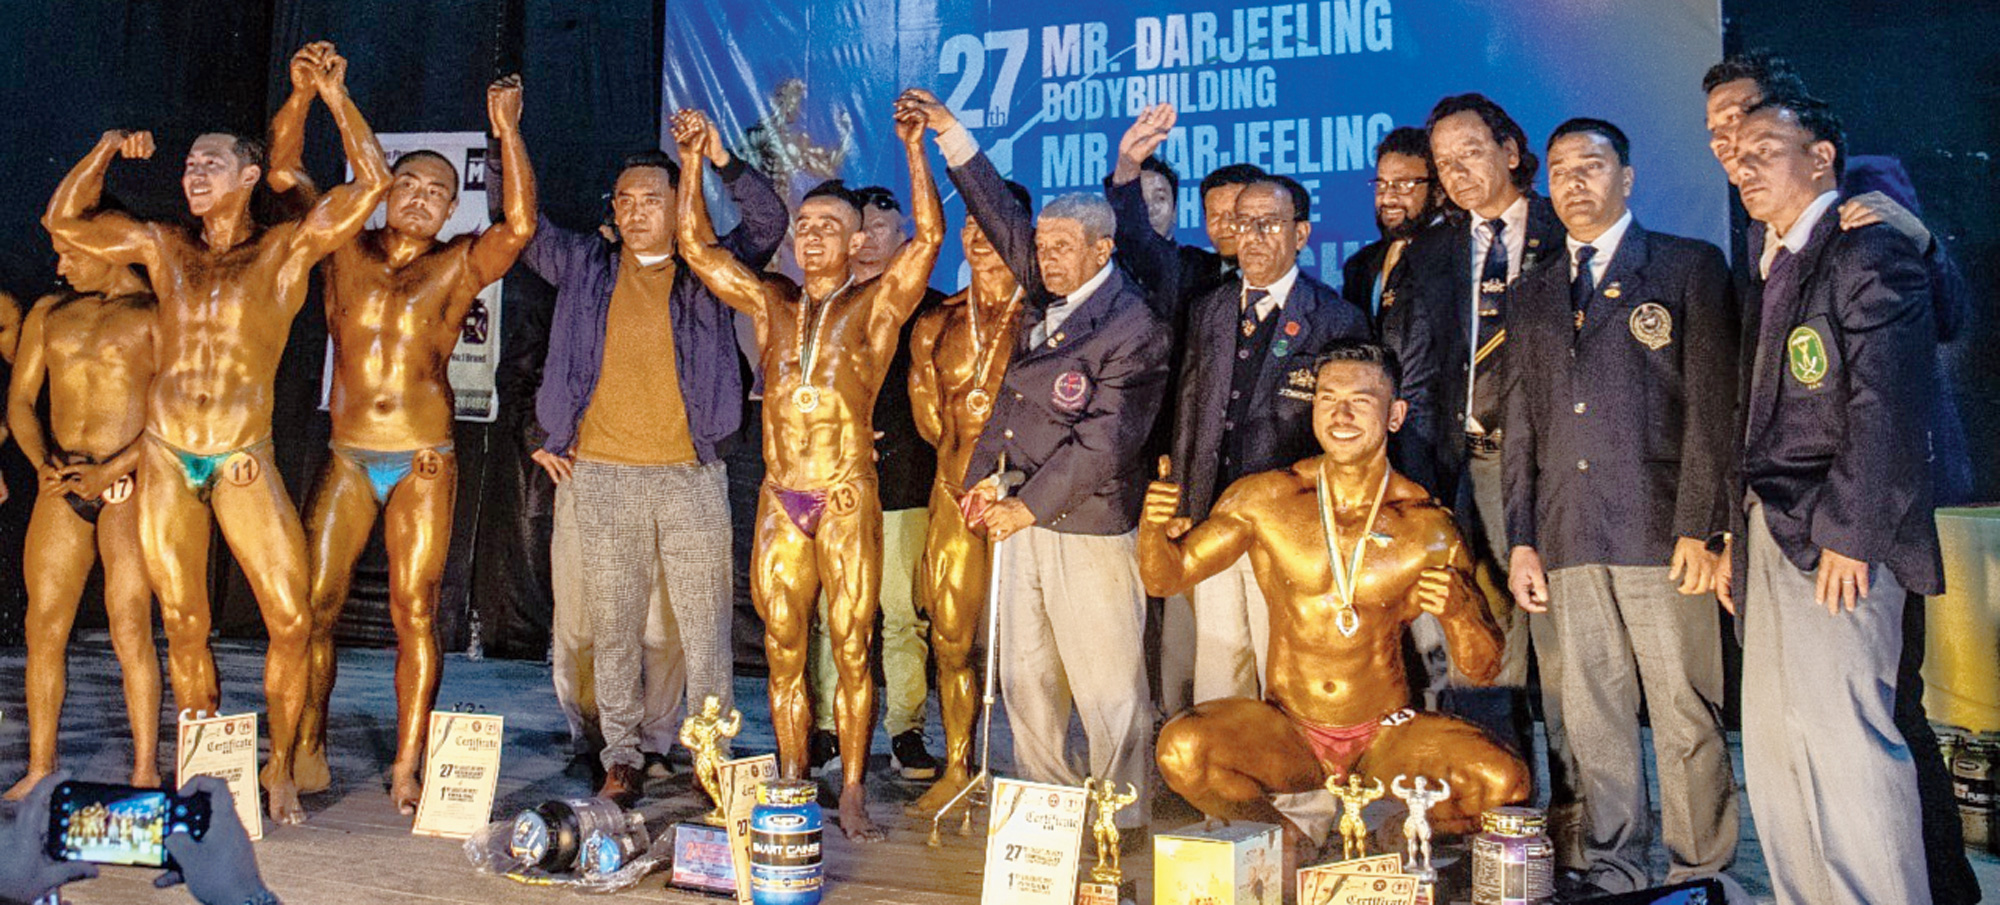 Pasang Sherpa (centre) after winning the title in Darjeeling.
